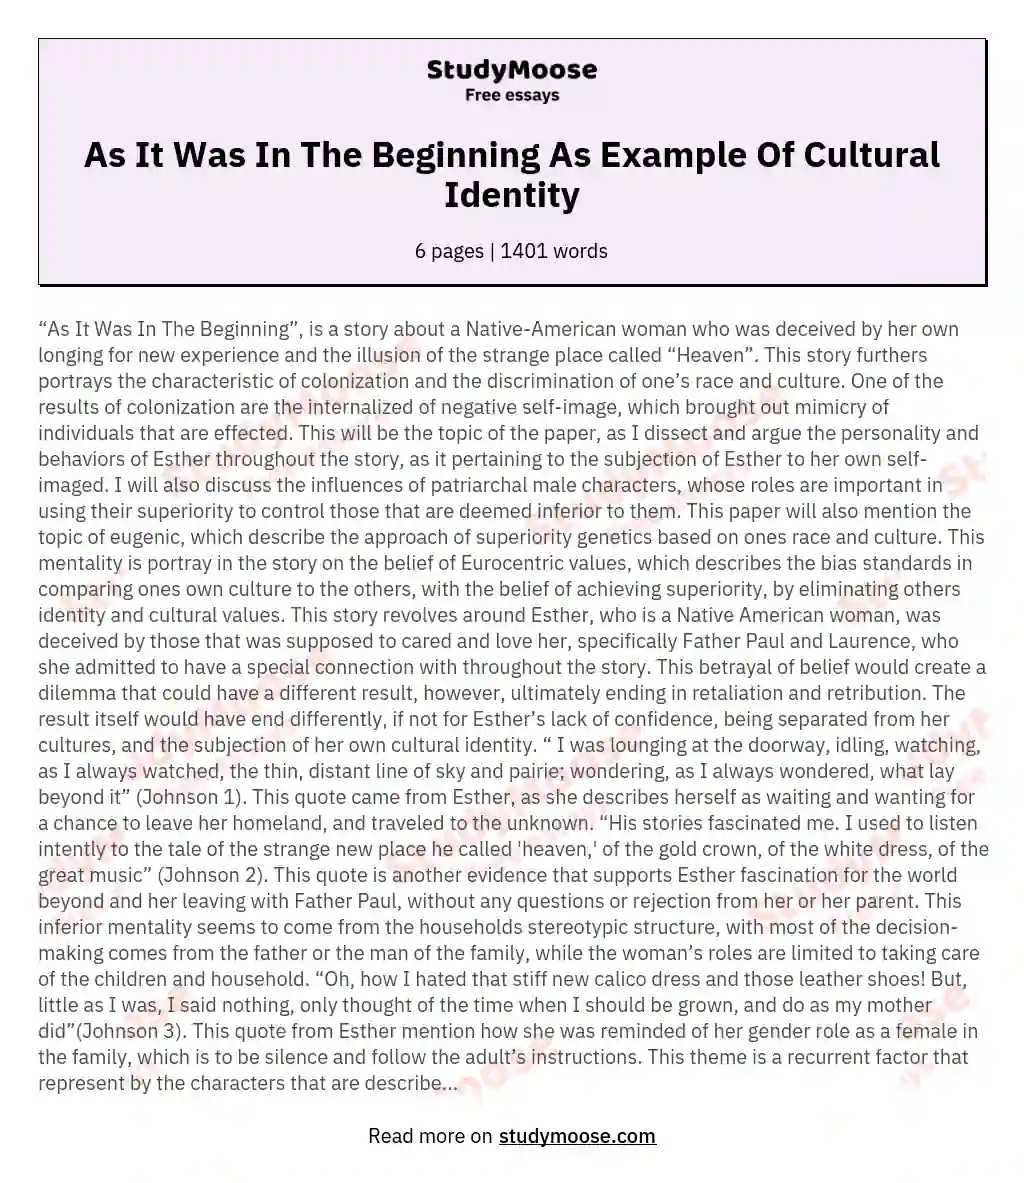 As It Was In The Beginning As Example Of Cultural Identity essay